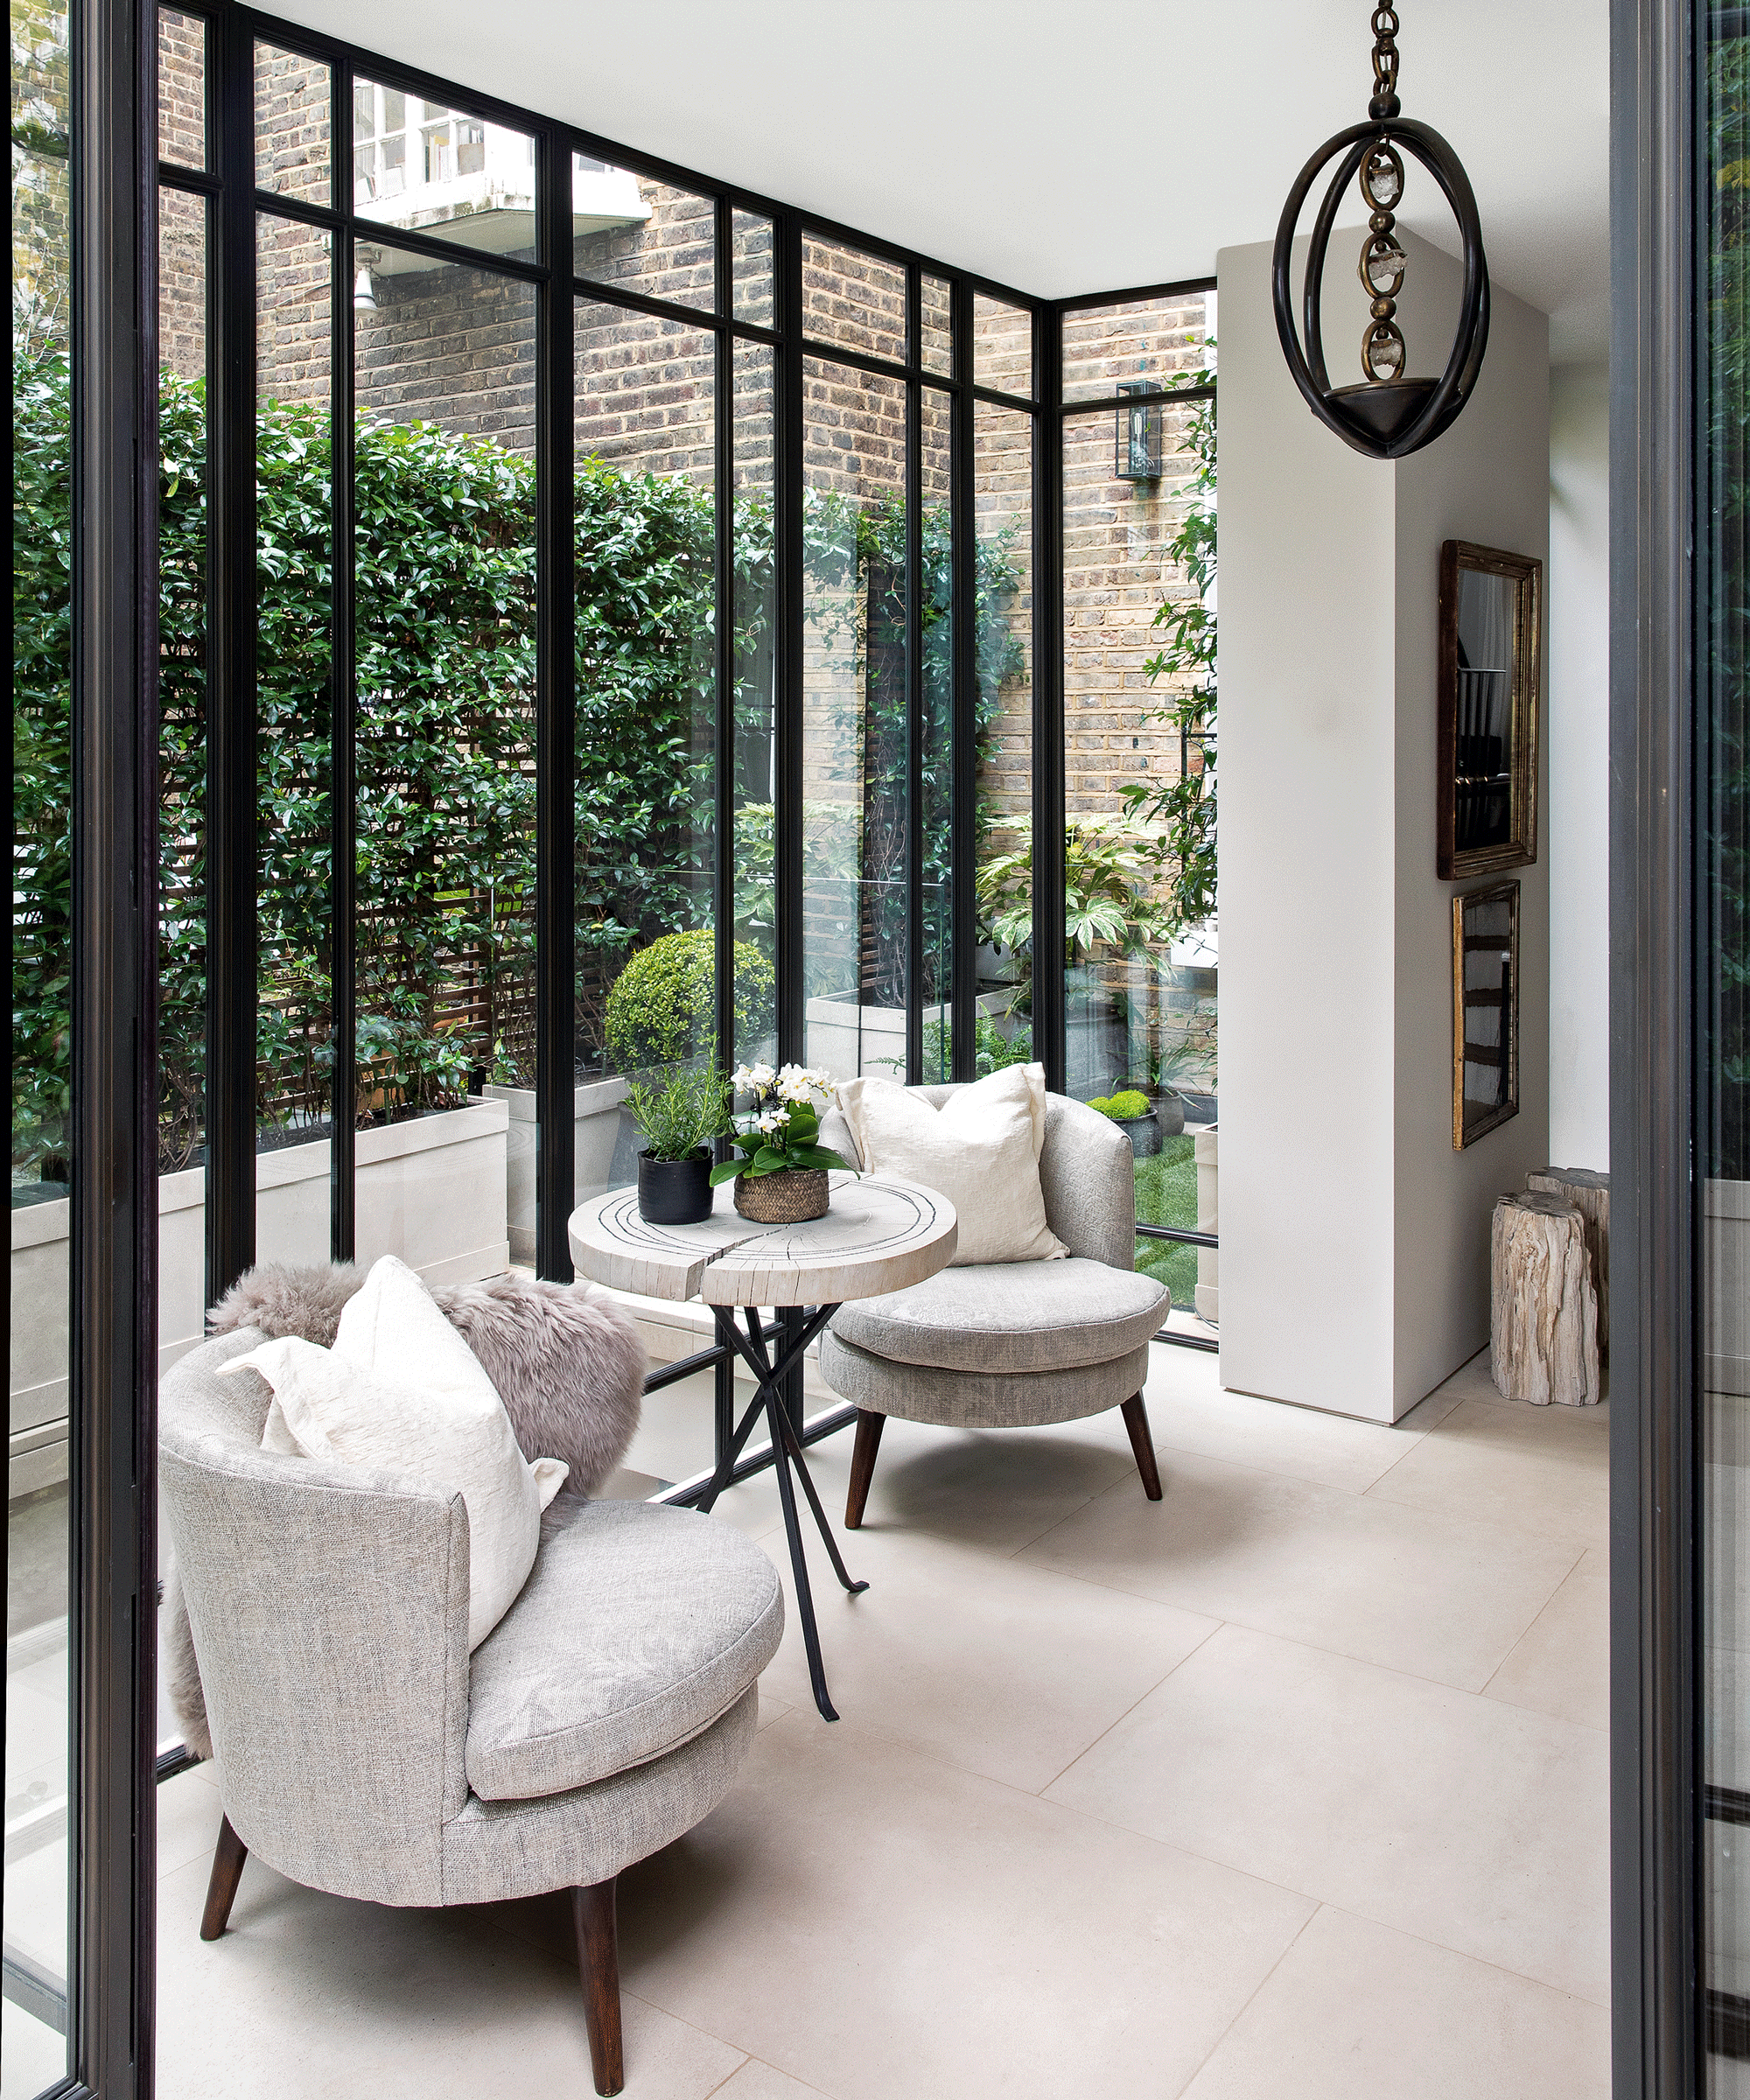 seating area in glass-walled room